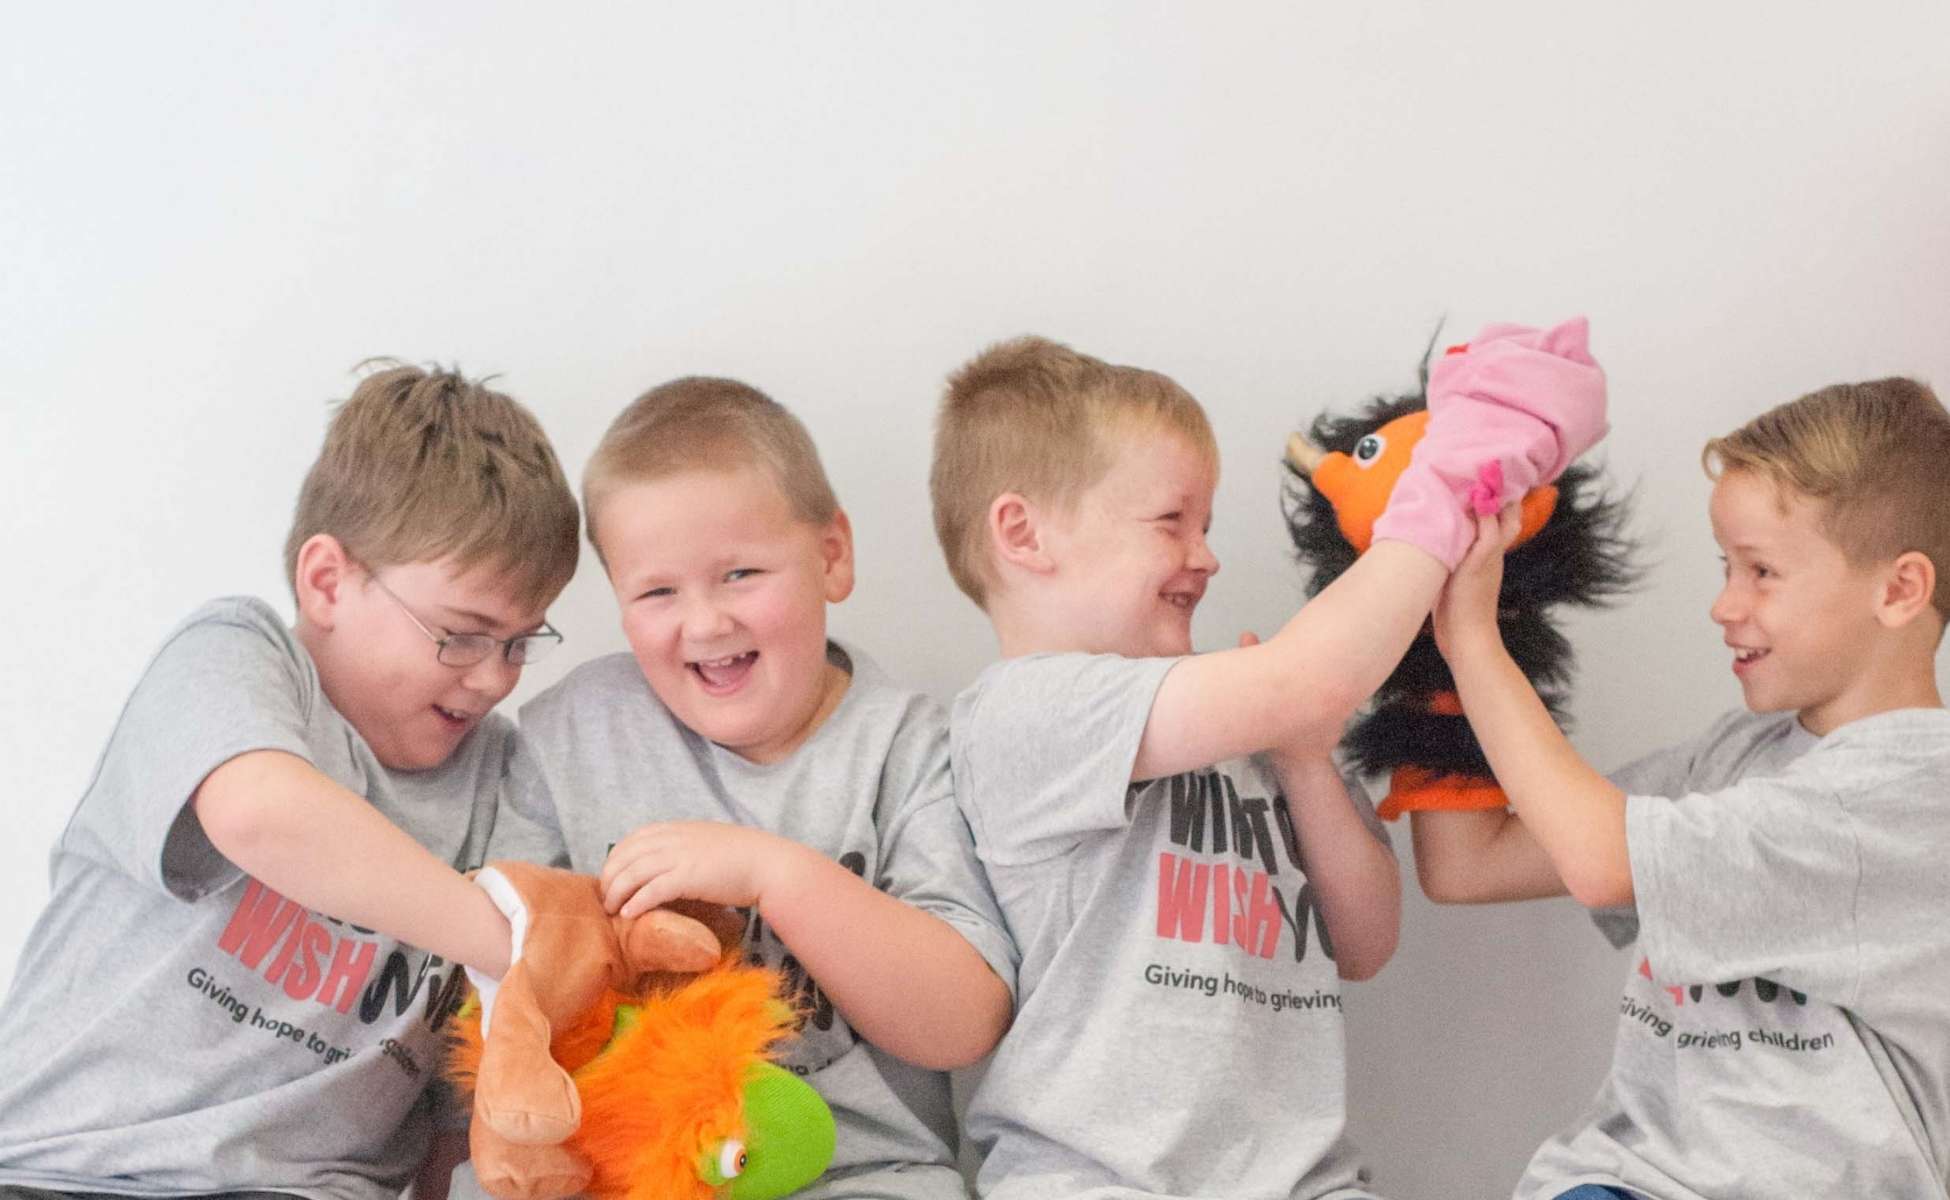 Four young boys in Winston's Wish t-shirts playing with puppets